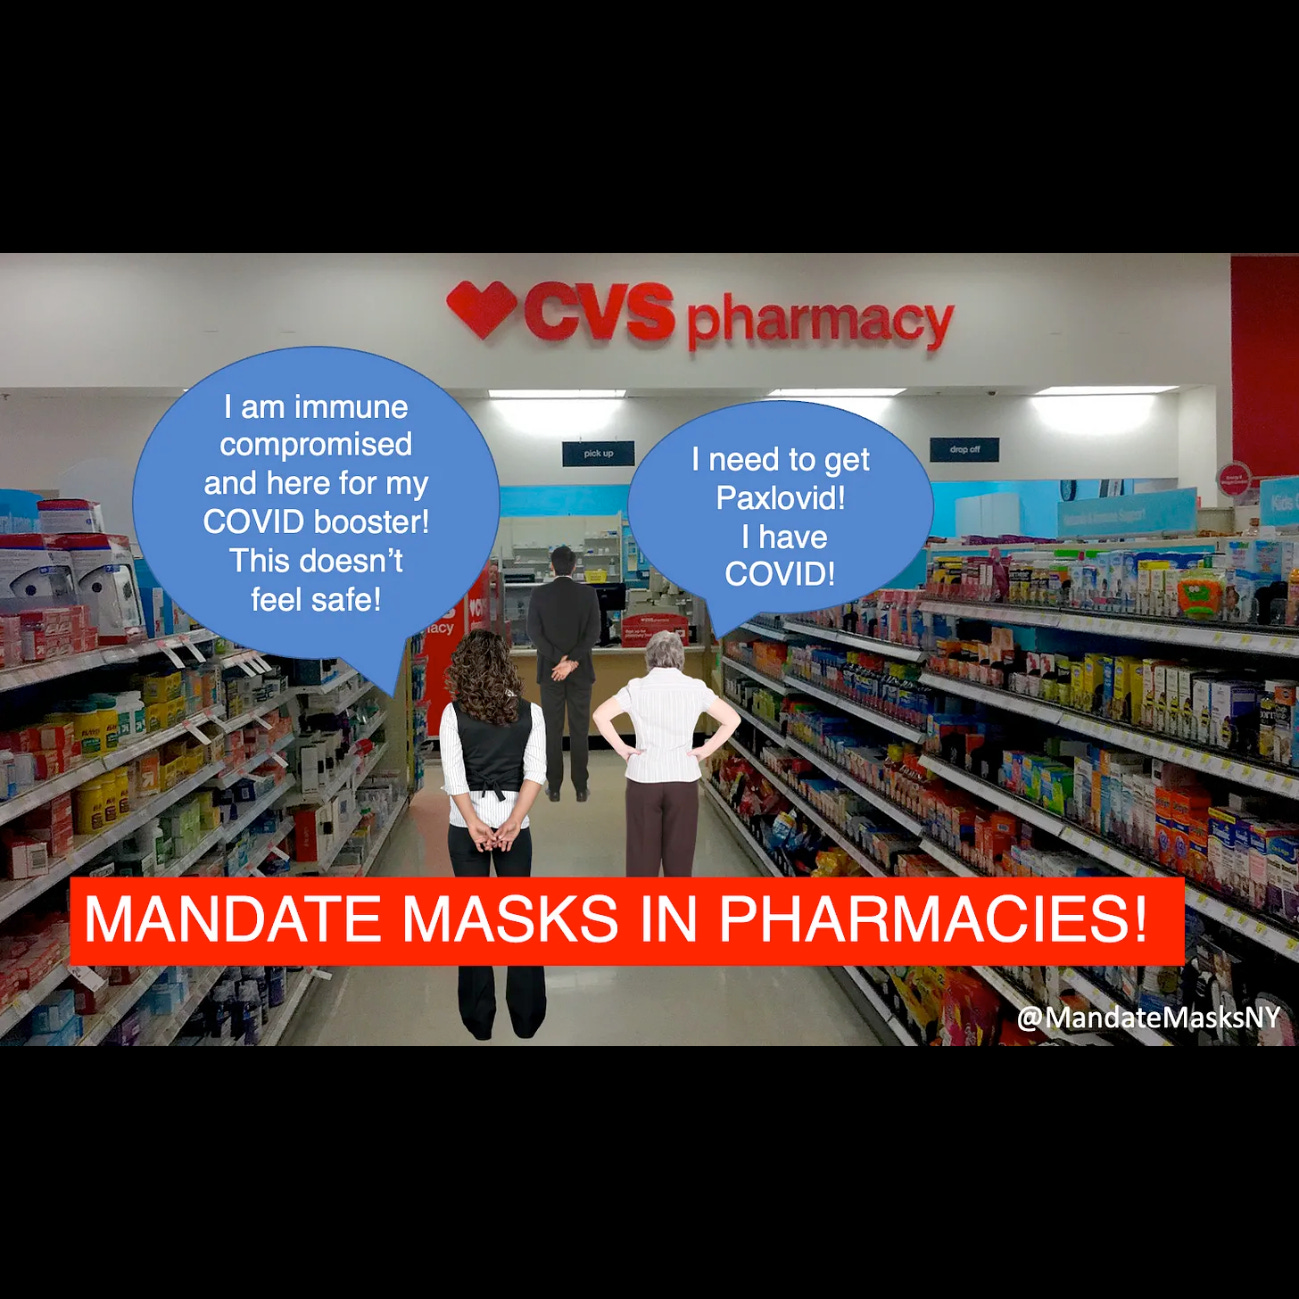 Photo of CVS pharmacy with three people in line. One lady with her hands on her hips saying "I need to get Paxlovid! I have COVID!" Another lady with her hands behind her back saying "I am immune compromised and here for my COVID booster! This doesn't feel safe!" Red text box at bottom reads "MANDATE MASKS IN PHARMACIES!"